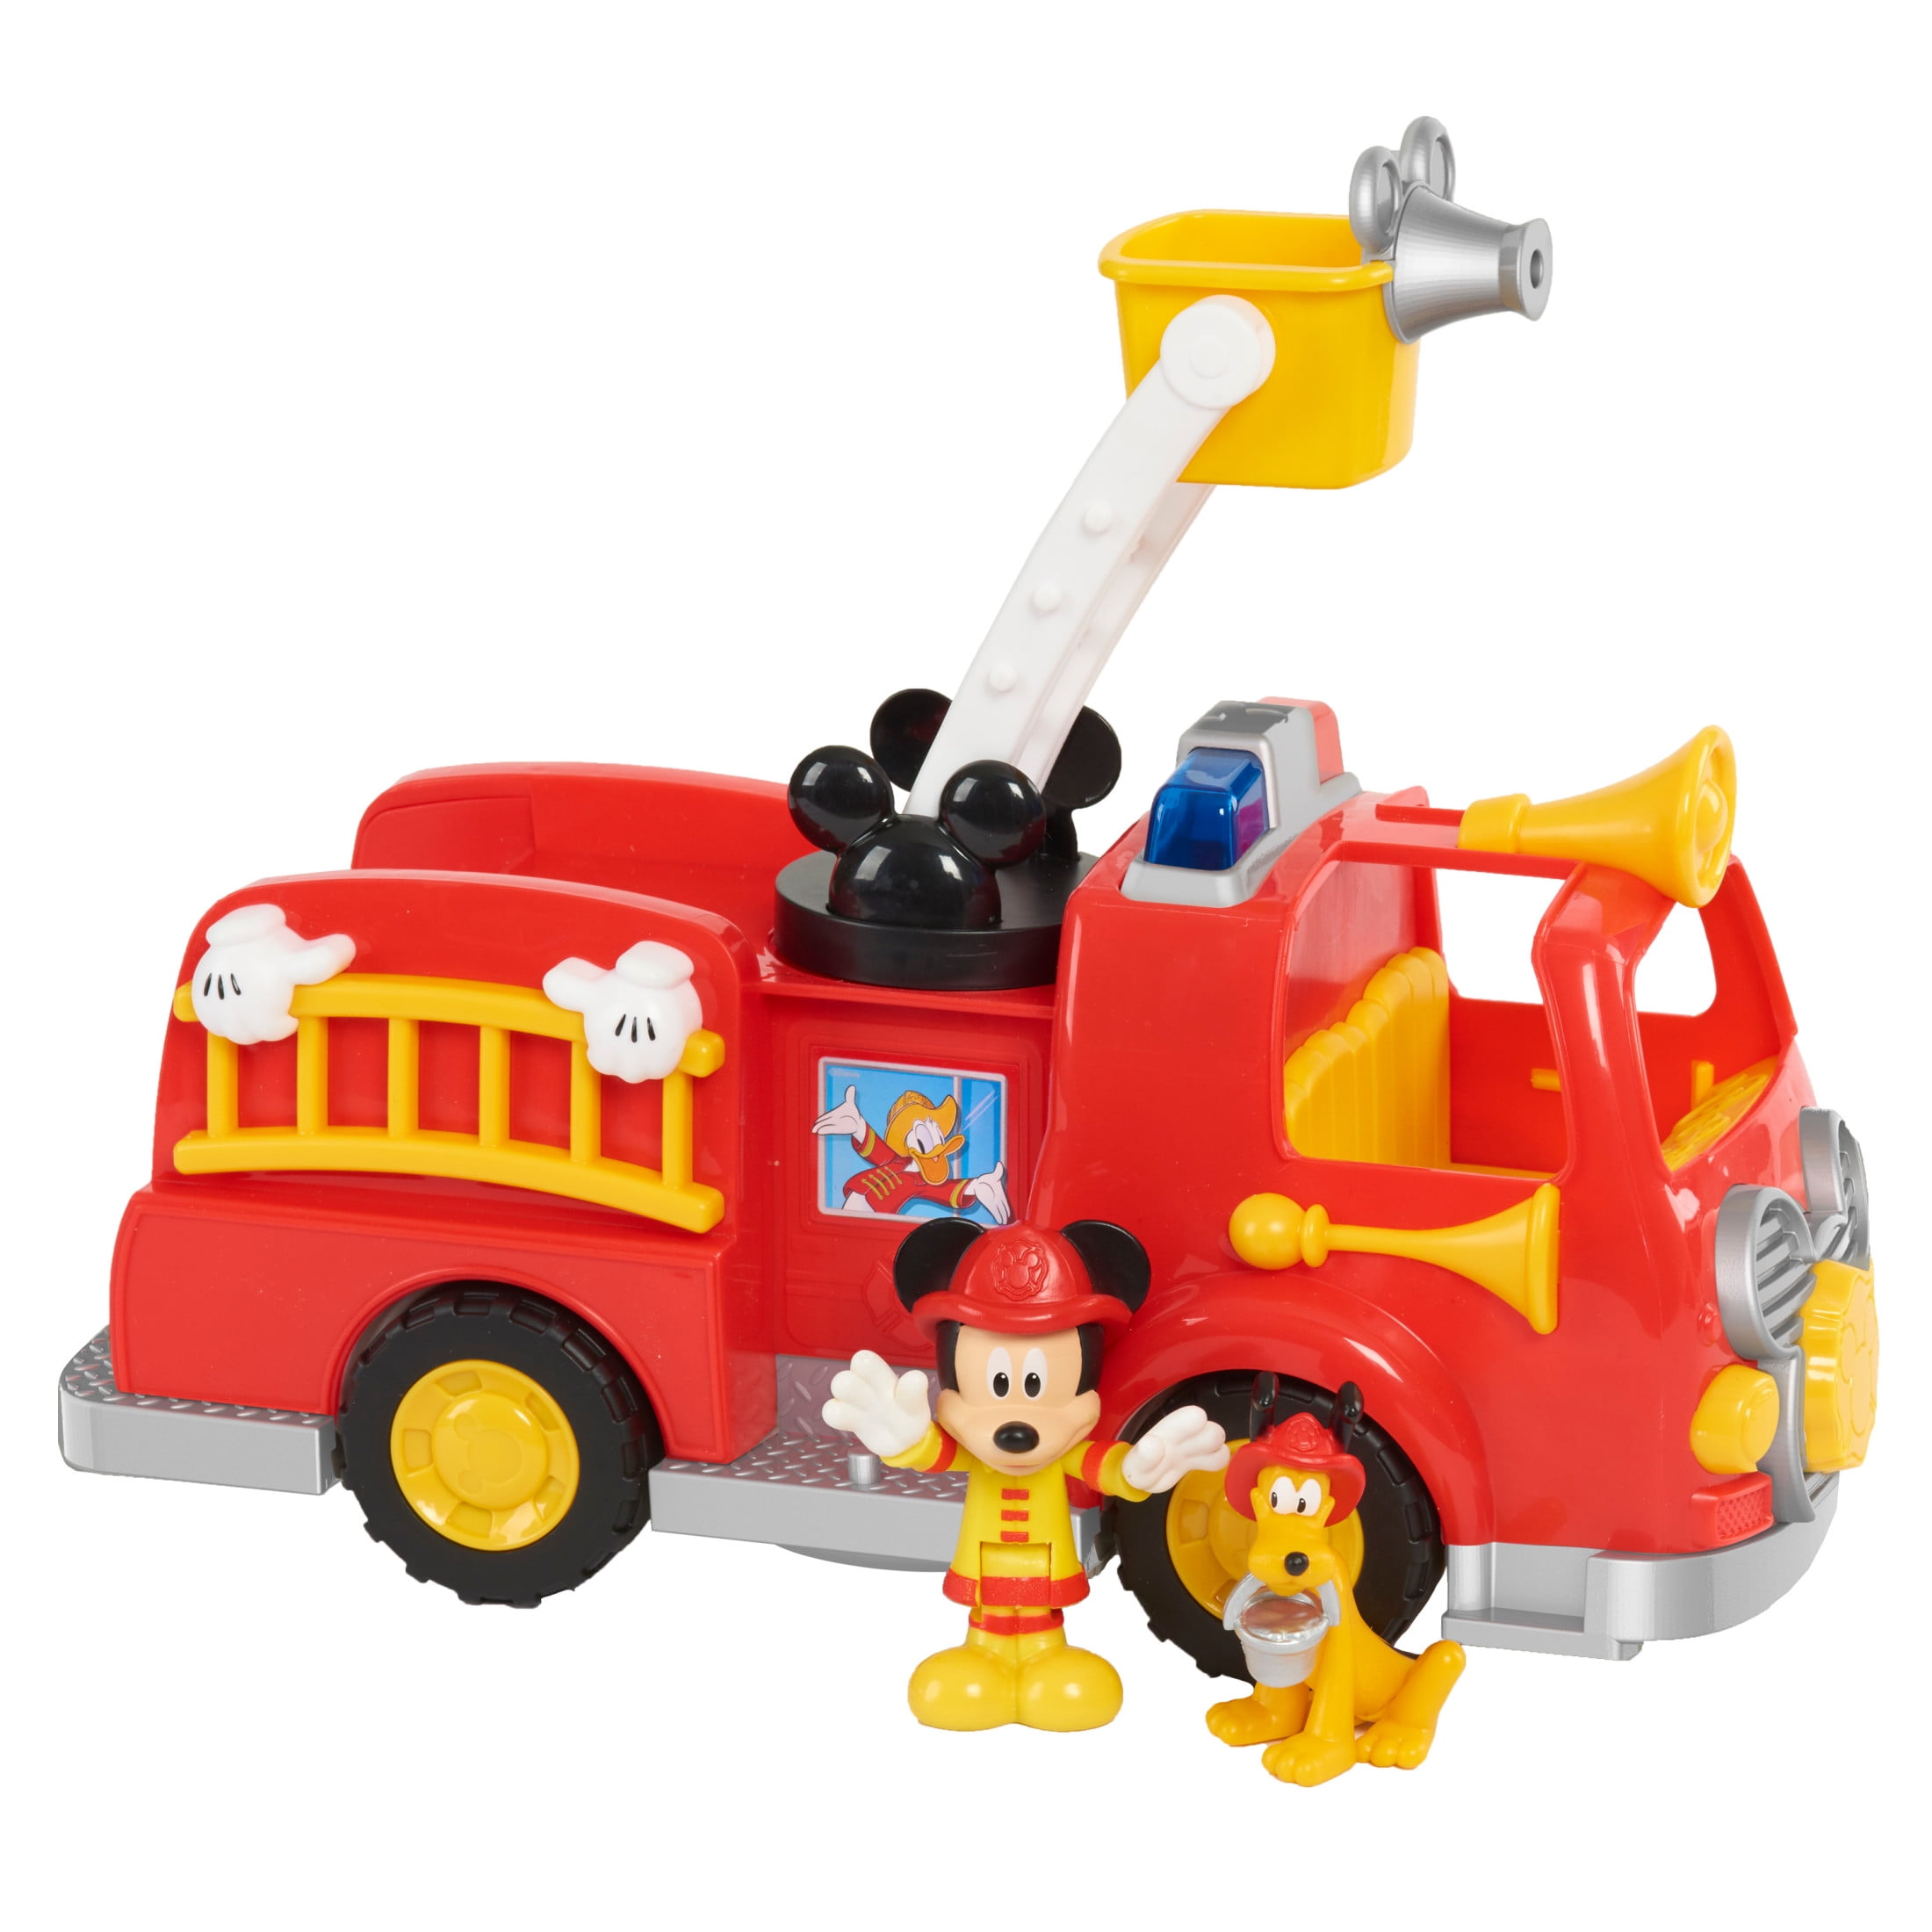 Disney’s Mickey Mouse Mickey’s Fire Engine, Figure and Vehicle Playset,  Lights and Sounds, Kids Toys for Ages 3 up